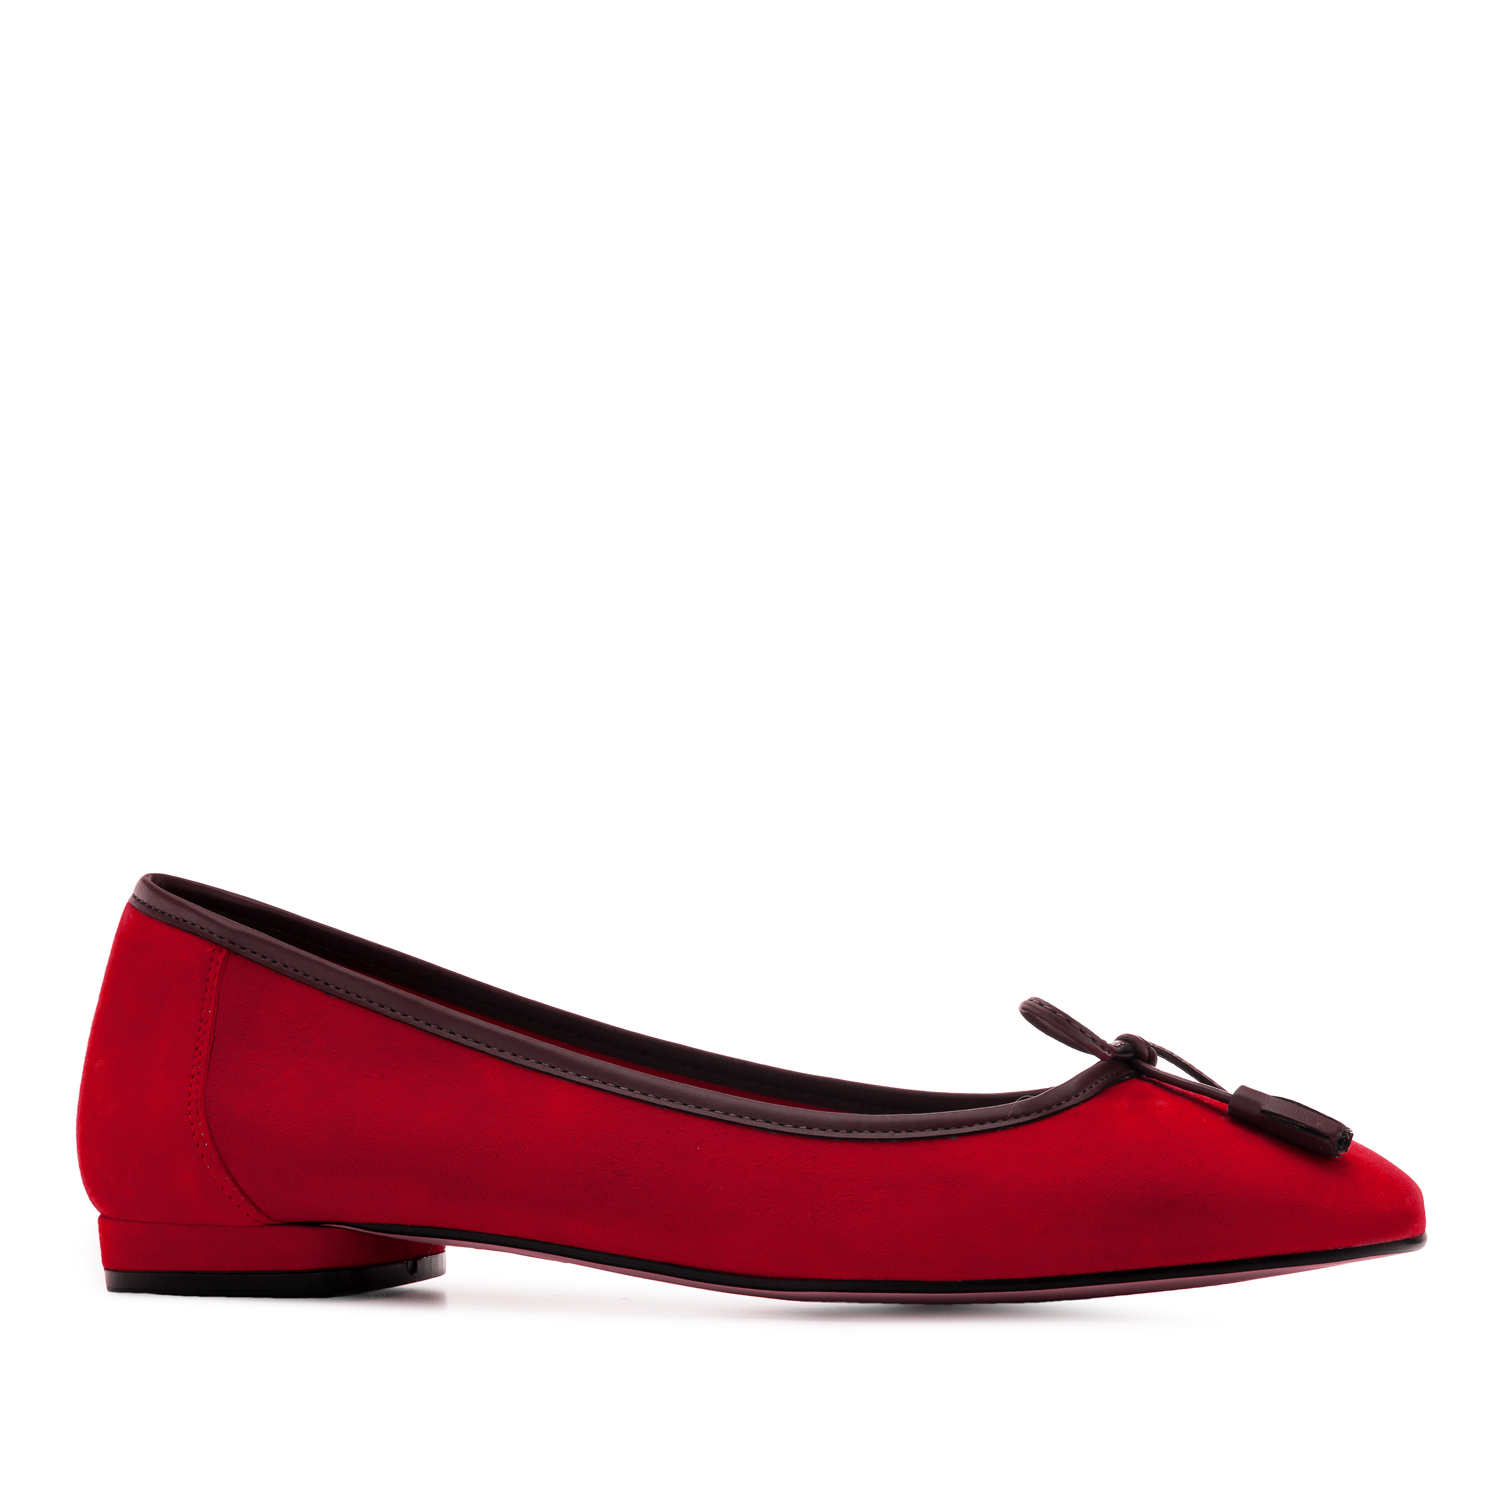 Bow Ballet Flats in Red Suede Leather 